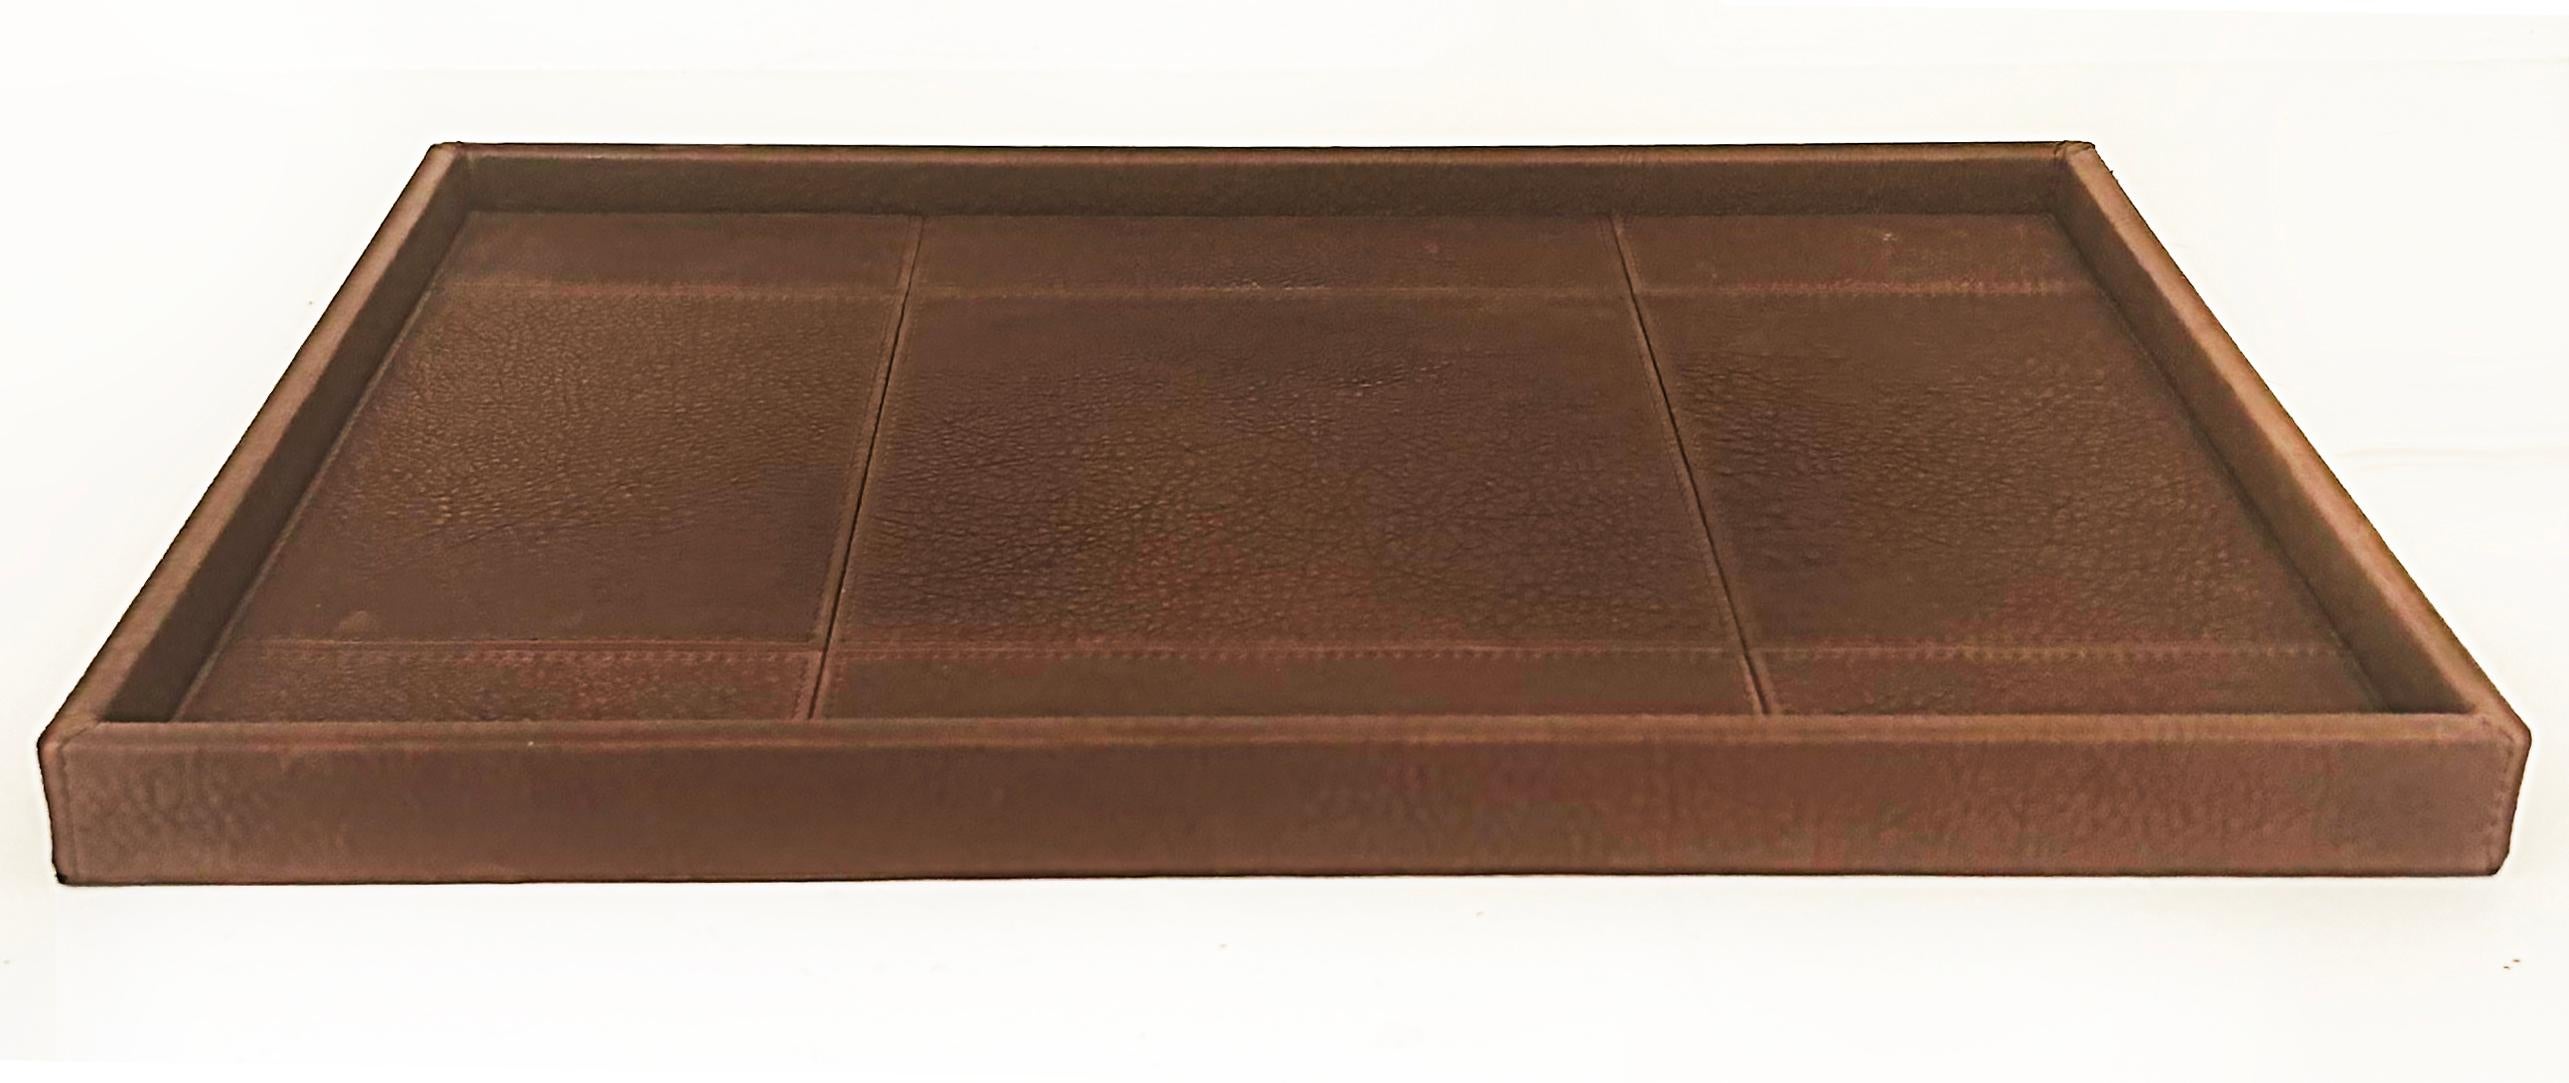 French Gilles Caffier Leather Clad Vanity Tray Made in France 2006